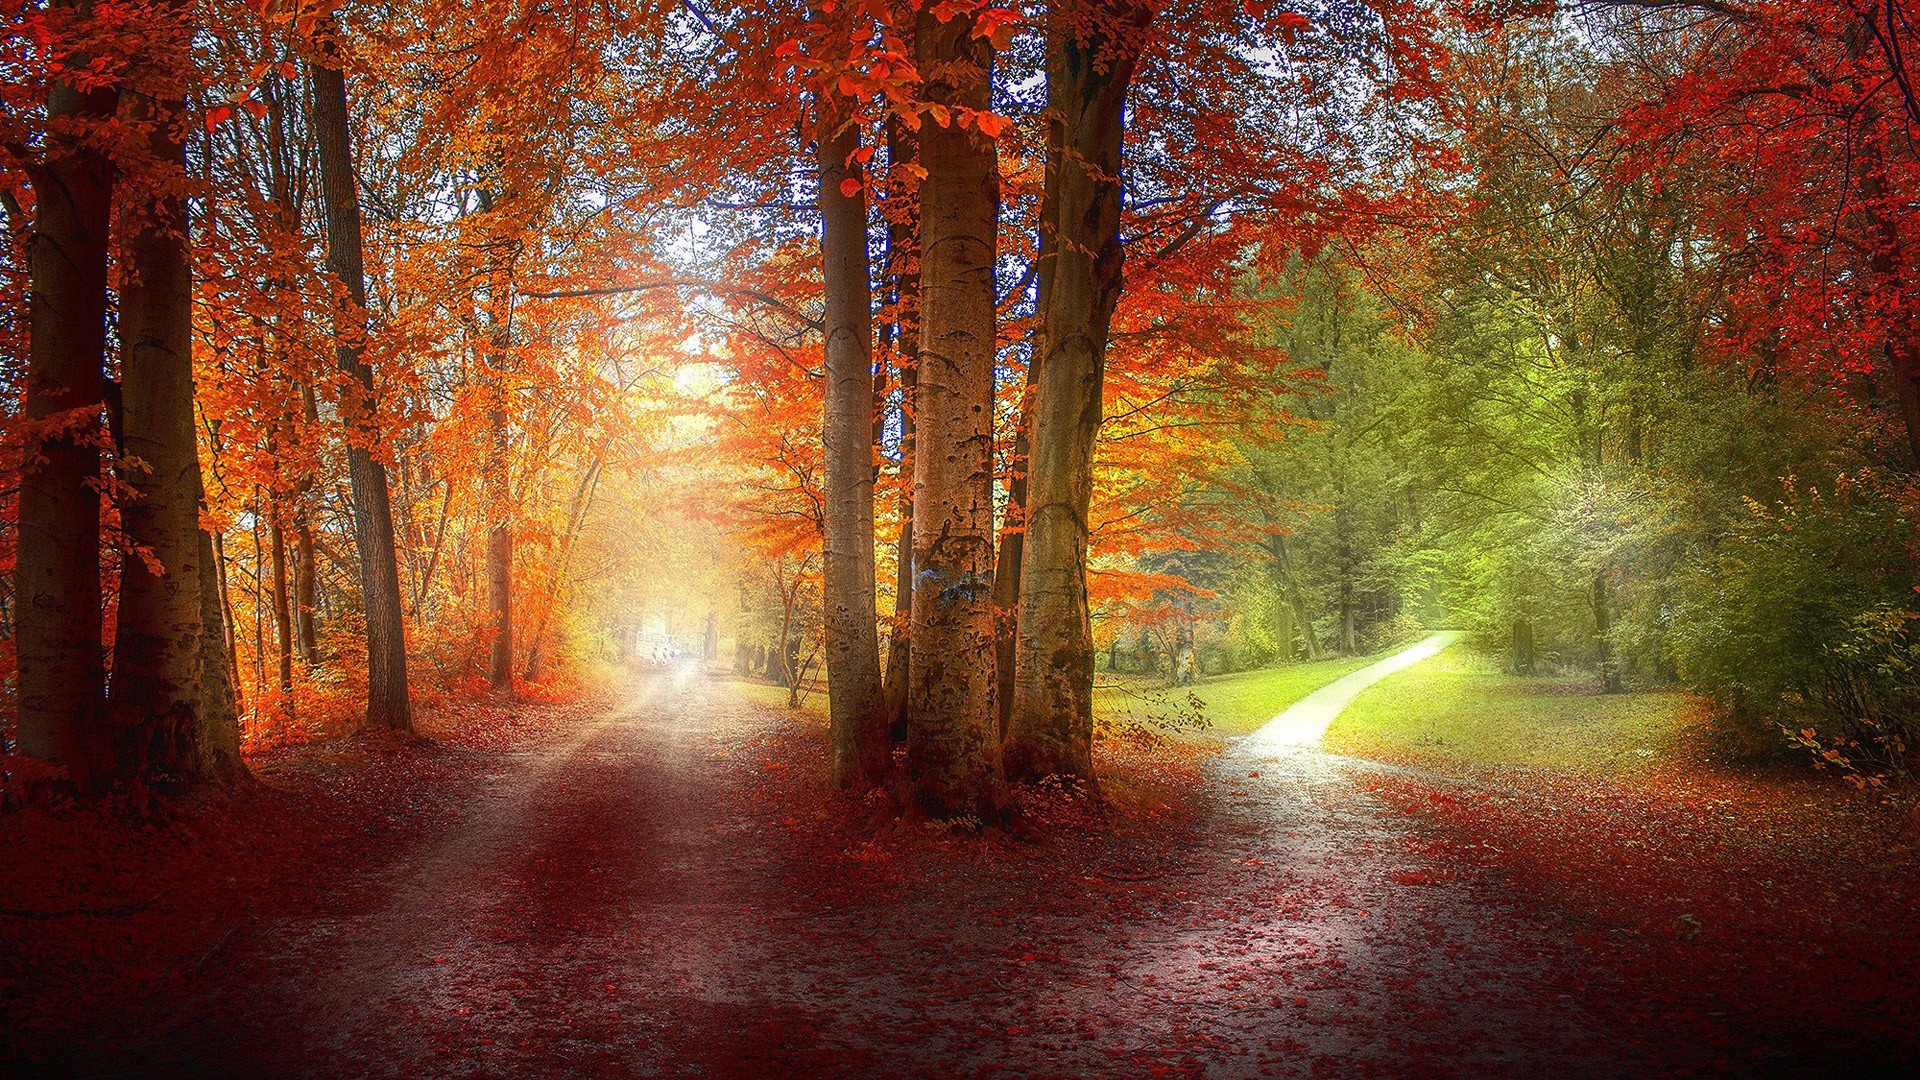 General 1920x1080 forest trees dirt road red leaves fall outdoors